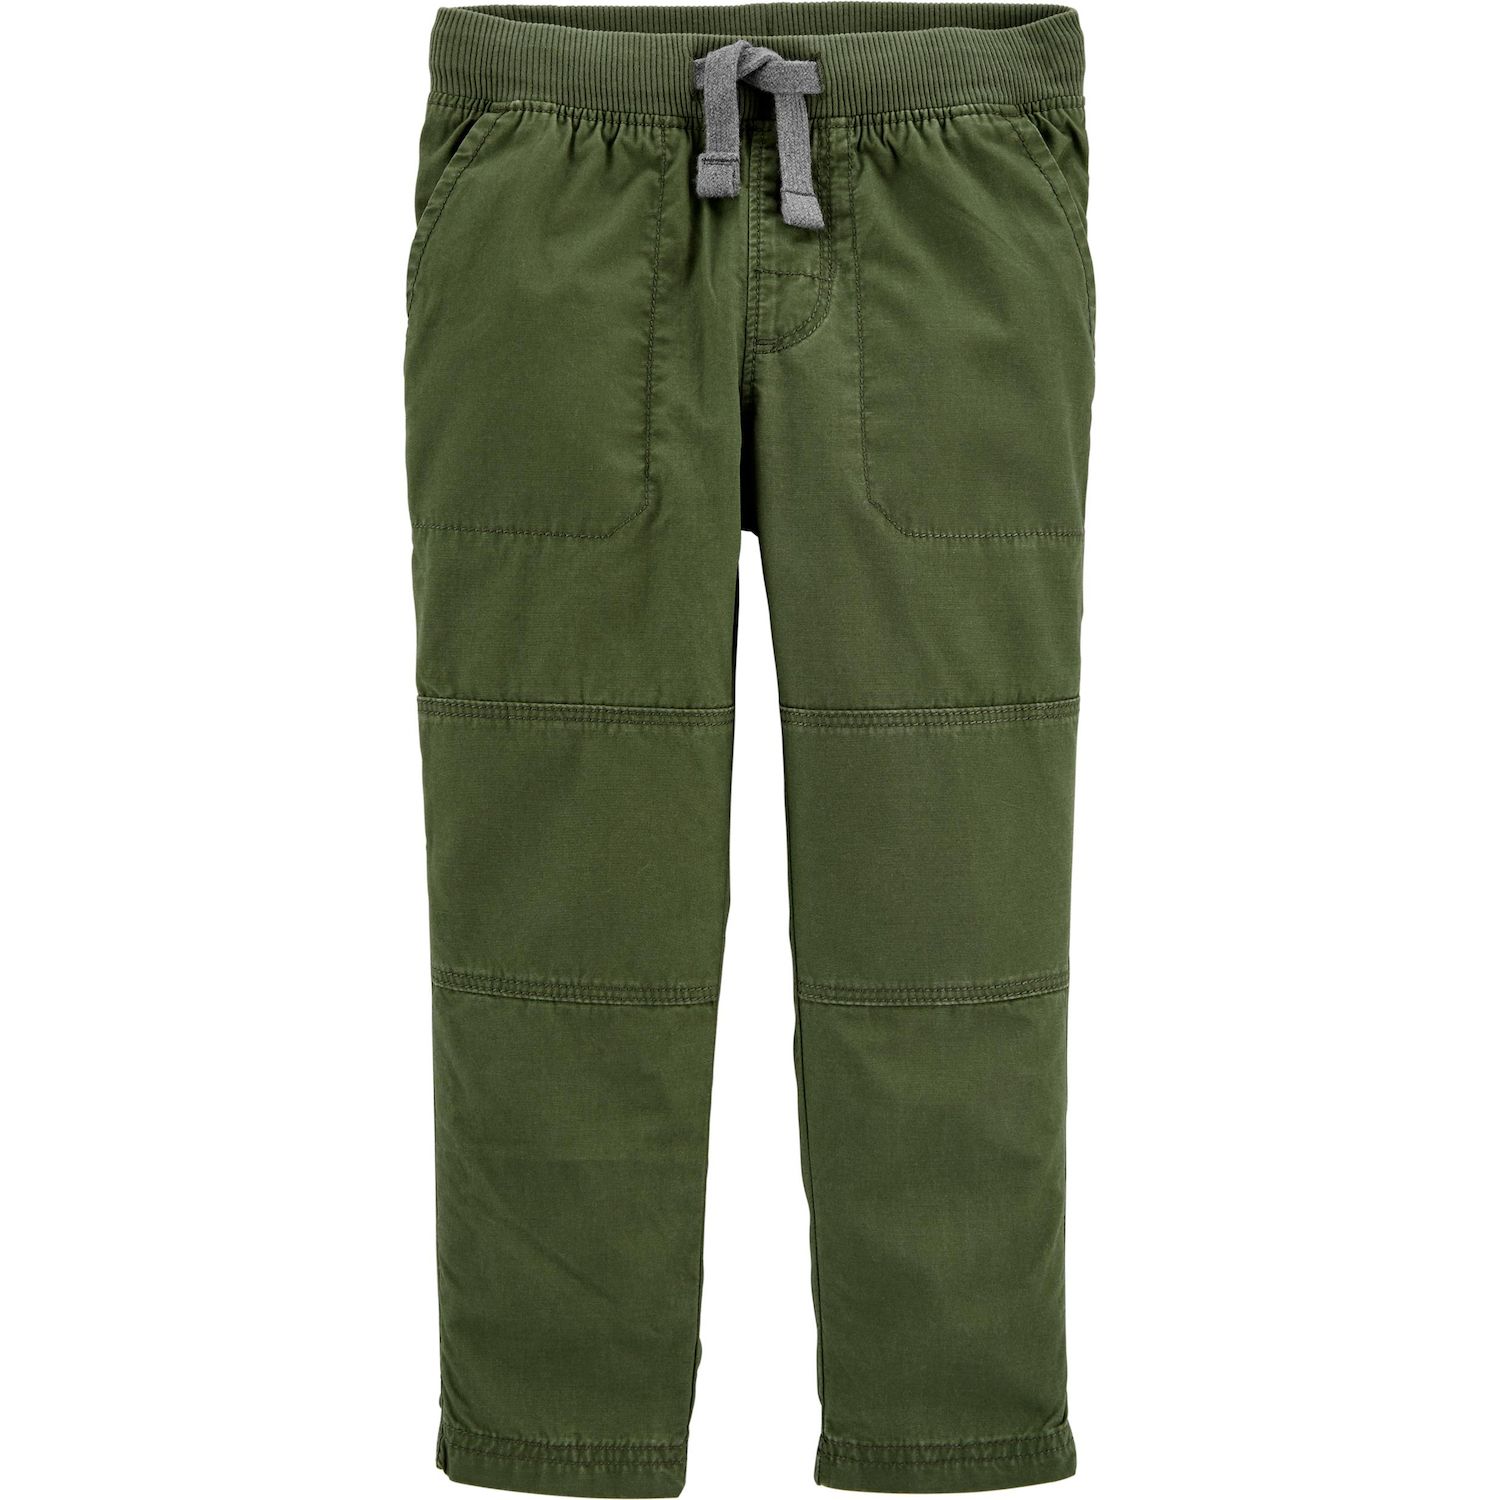 reinforced knee pants for toddlers